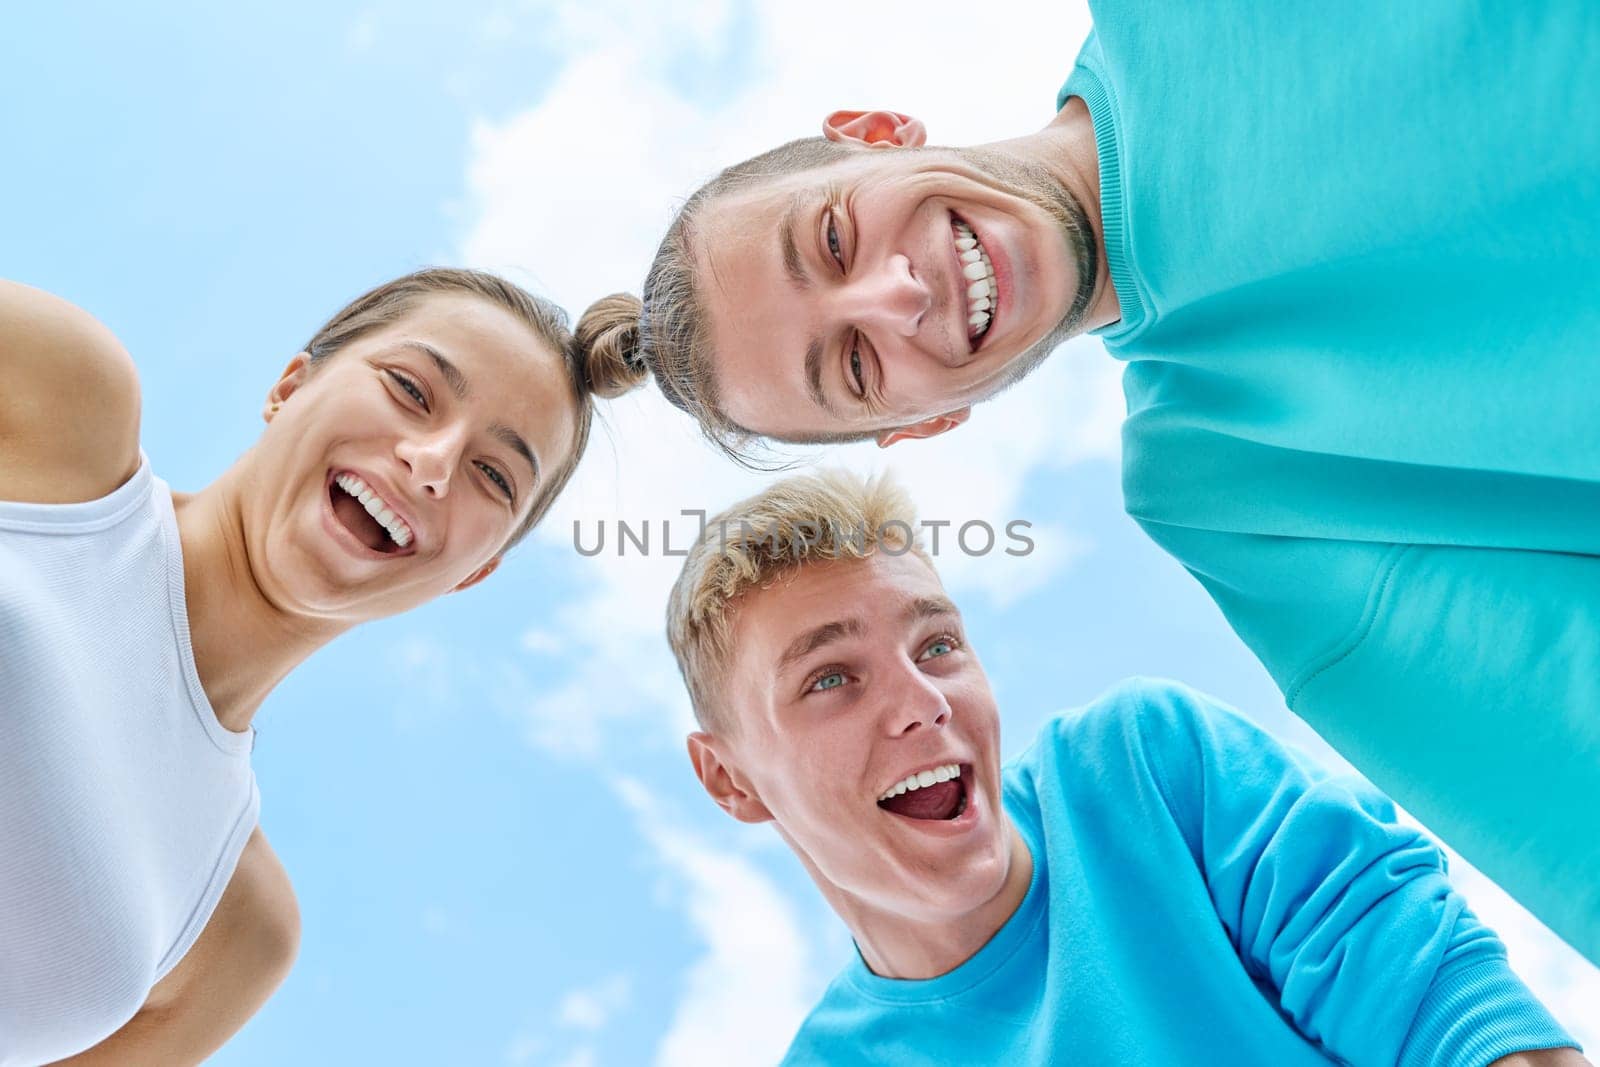 Closeup faces of young teenage guys and girl laughing looking down at camera, blue sky with clouds background. Youth, team summer vacation, communication leisure friendship fun lifestyle holiday